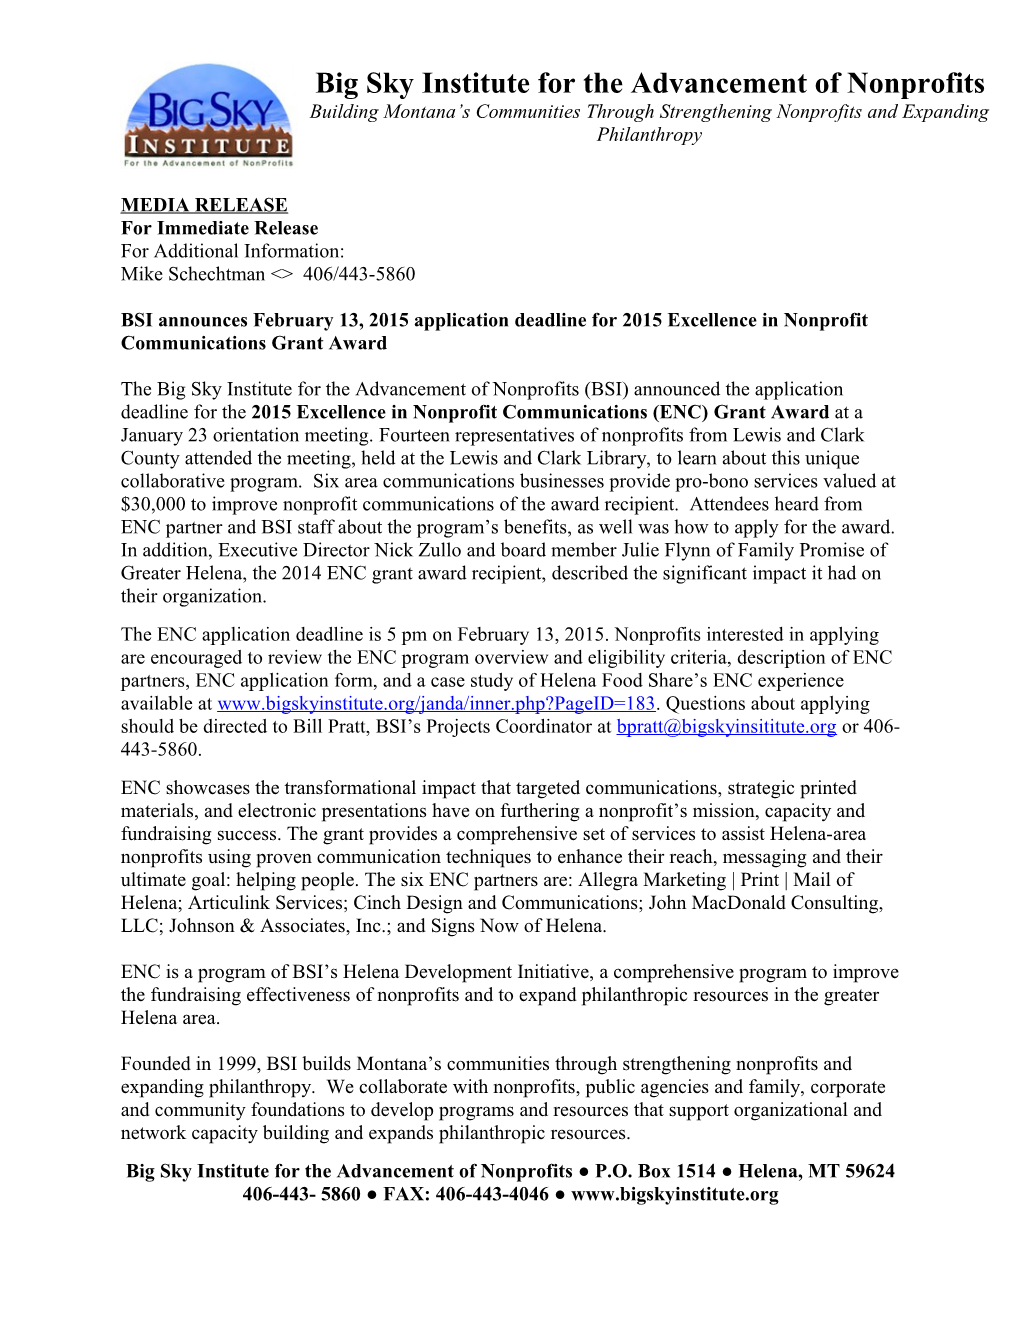 Letter of Agreement for the Montana Nonprofit Connections Progr